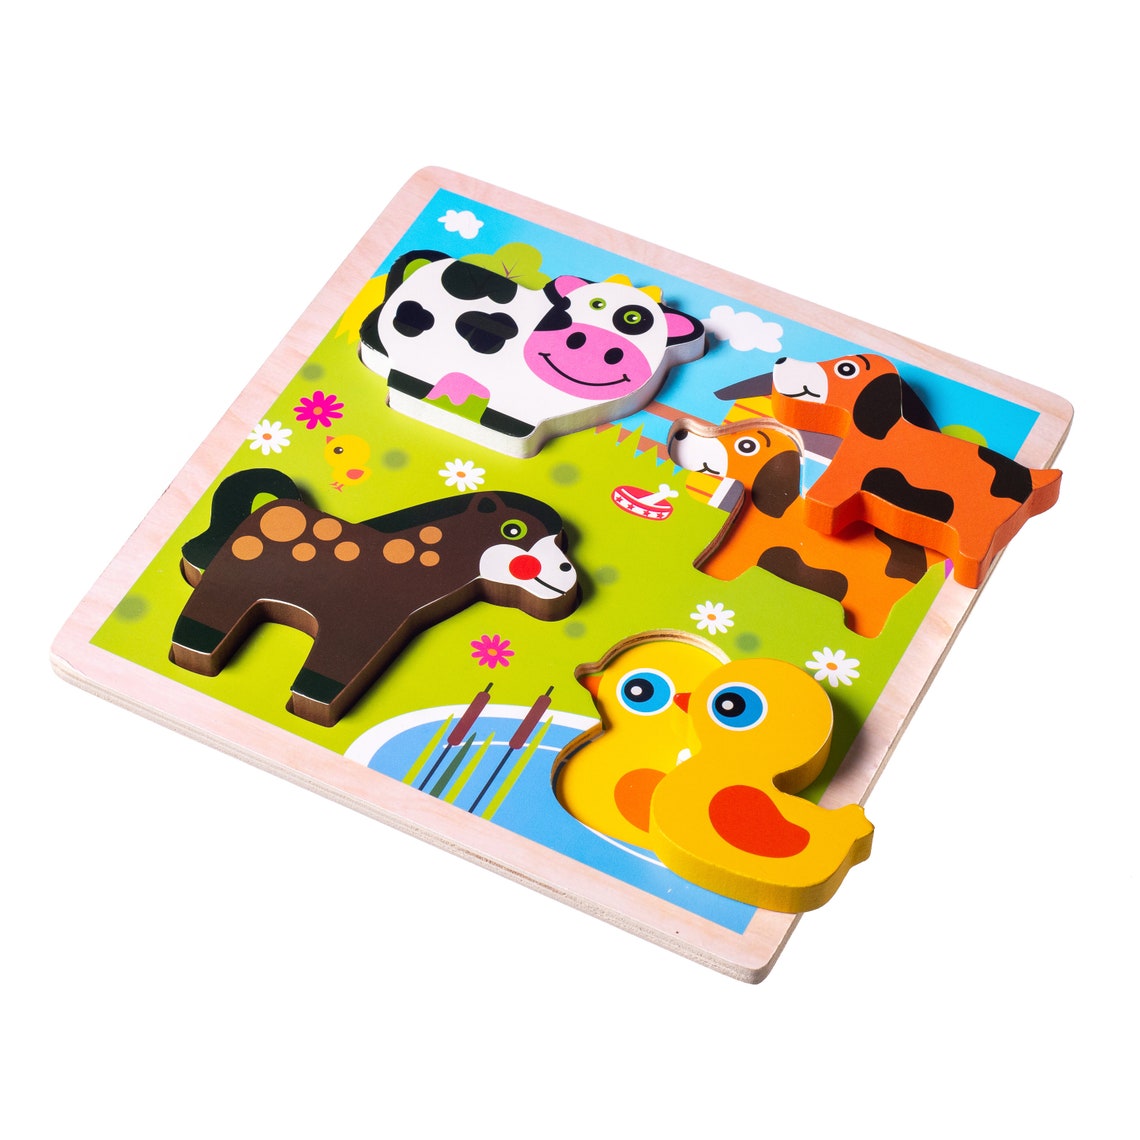 ELIITI Wooden Chunky Puzzles for Toddlers 2 to 4 Years Old - Etsy